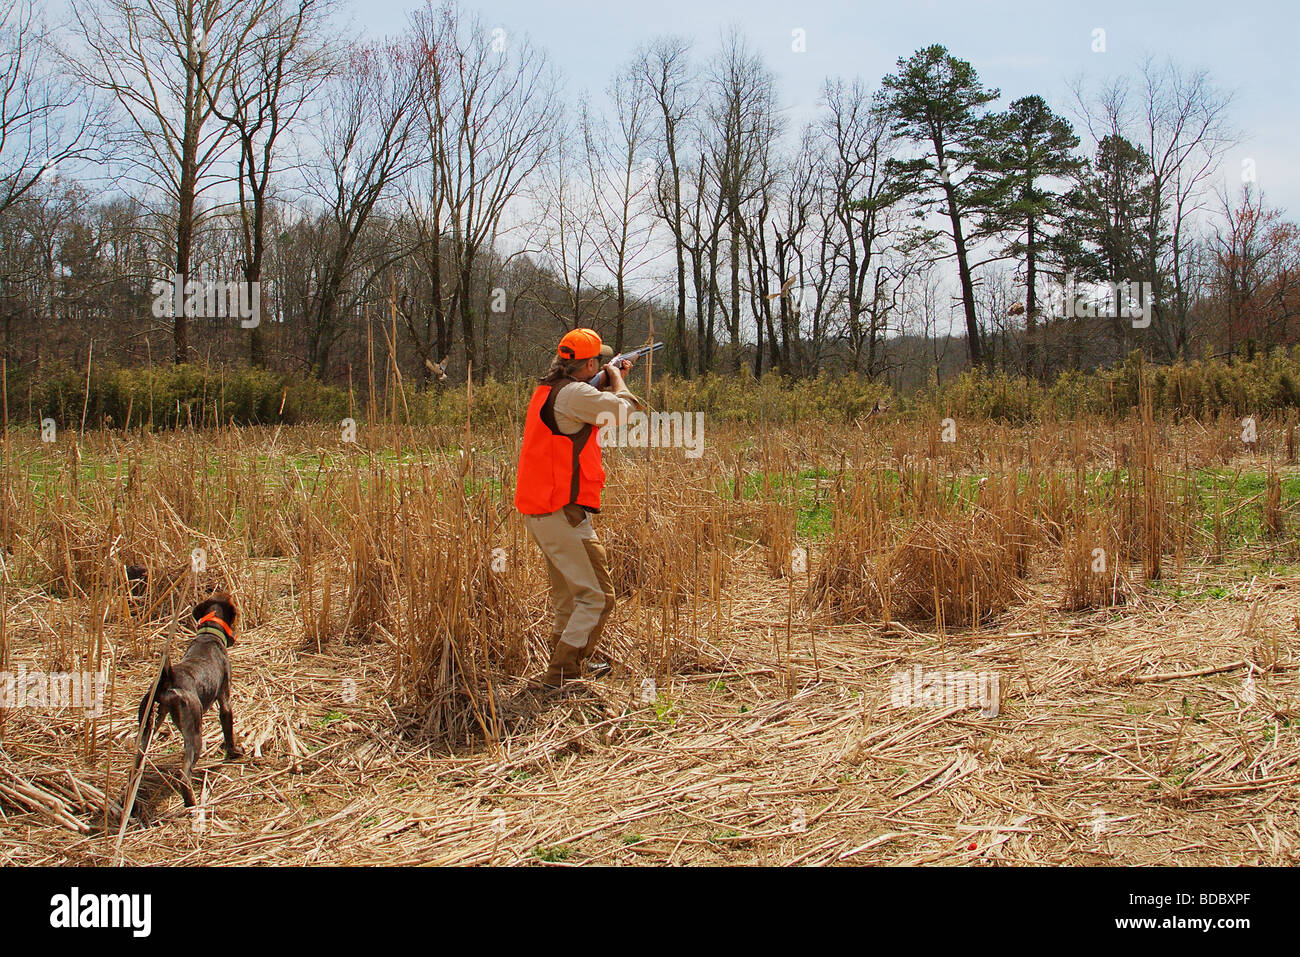 HUNTER FIRES AT A COVEY OF QUAIL FLUSHING IN FRONT OF HIM ORANGE SAFETY VEST SILVER PIGEON SHOTGUN Stock Photo